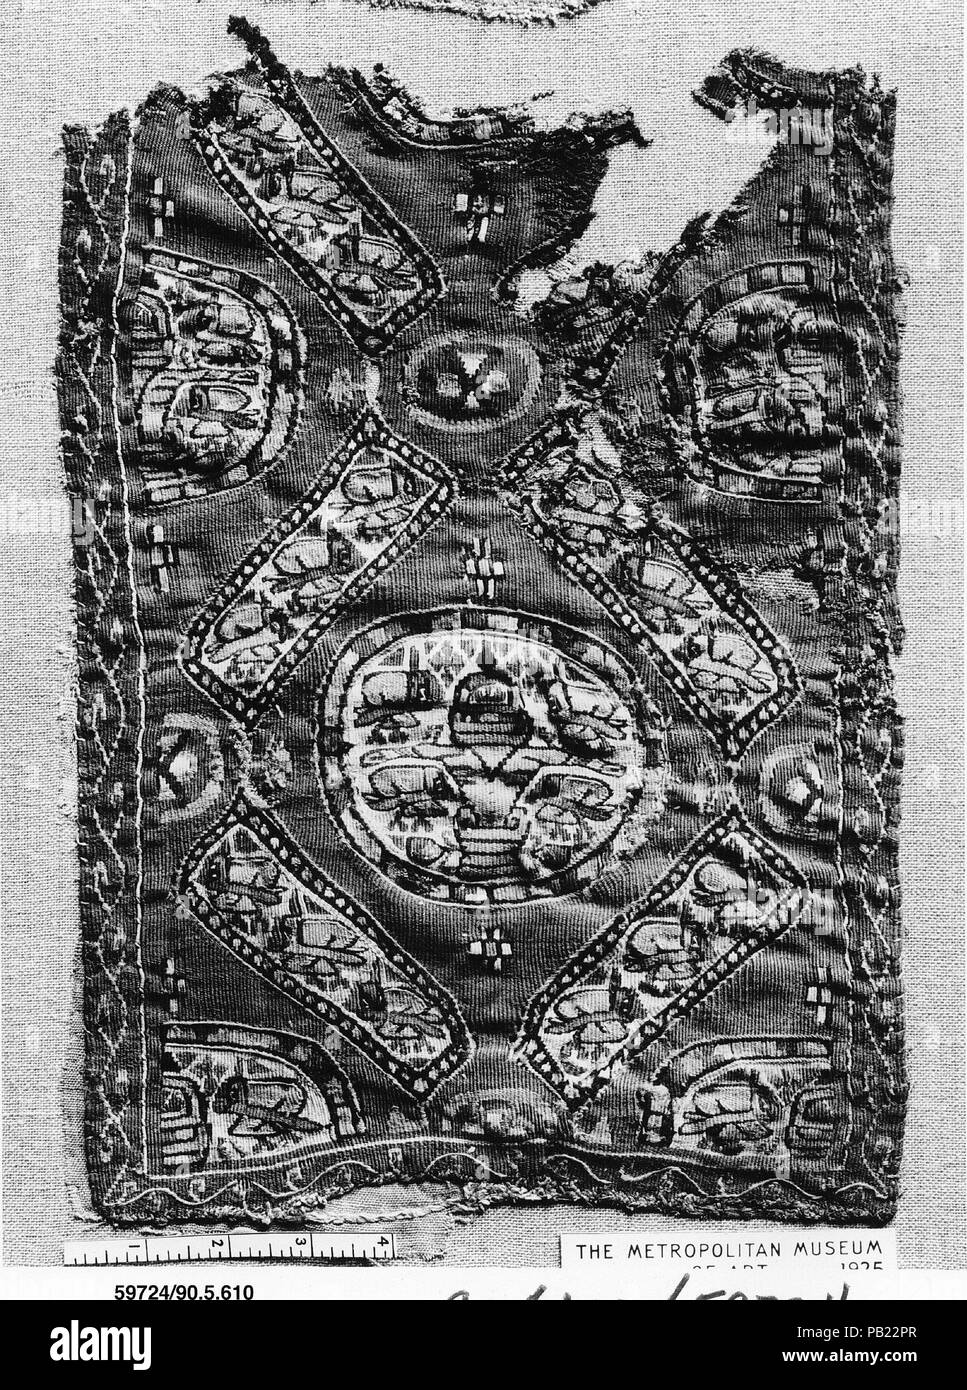 Fragment. Dimensions: 14 3/8 in. high 9 3/4 in. wide (36.5 cm high 24.7 cm wide). Date: 6th-7th century. Museum: Metropolitan Museum of Art, New York, USA. Stock Photo